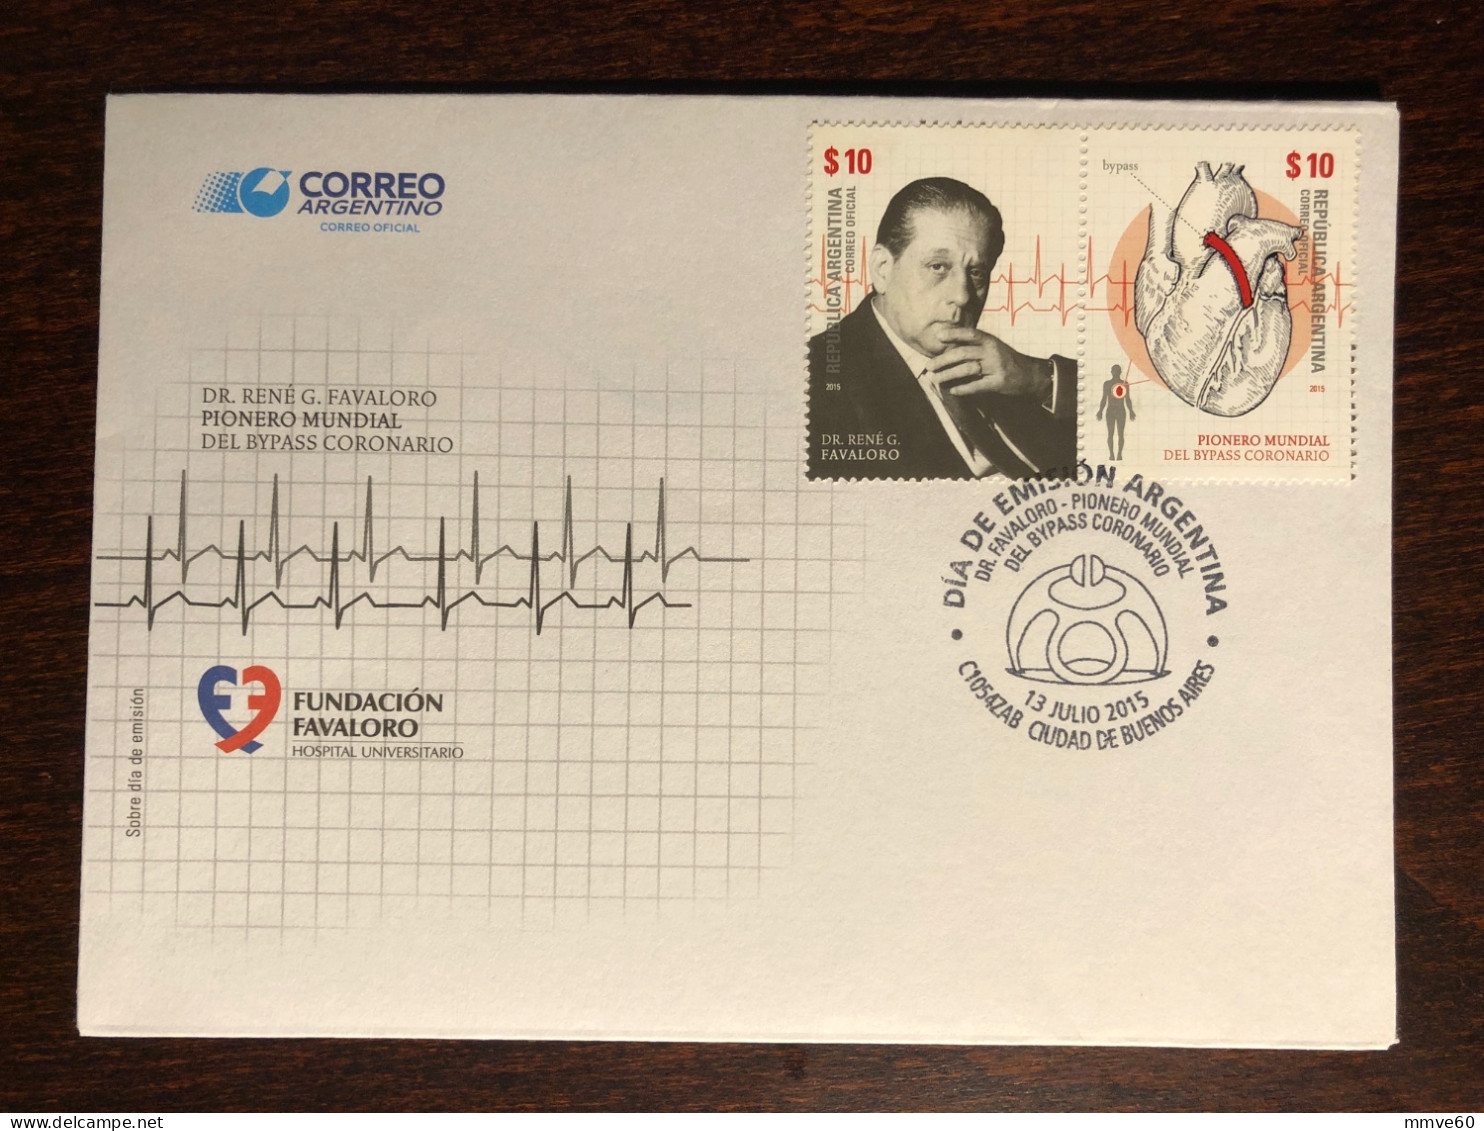 ARGENTINA FDC COVER 2015 YEAR DOCTOR FAVALORO CARDIOLOGY HEART HEALTH MEDICINE STAMPS - FDC